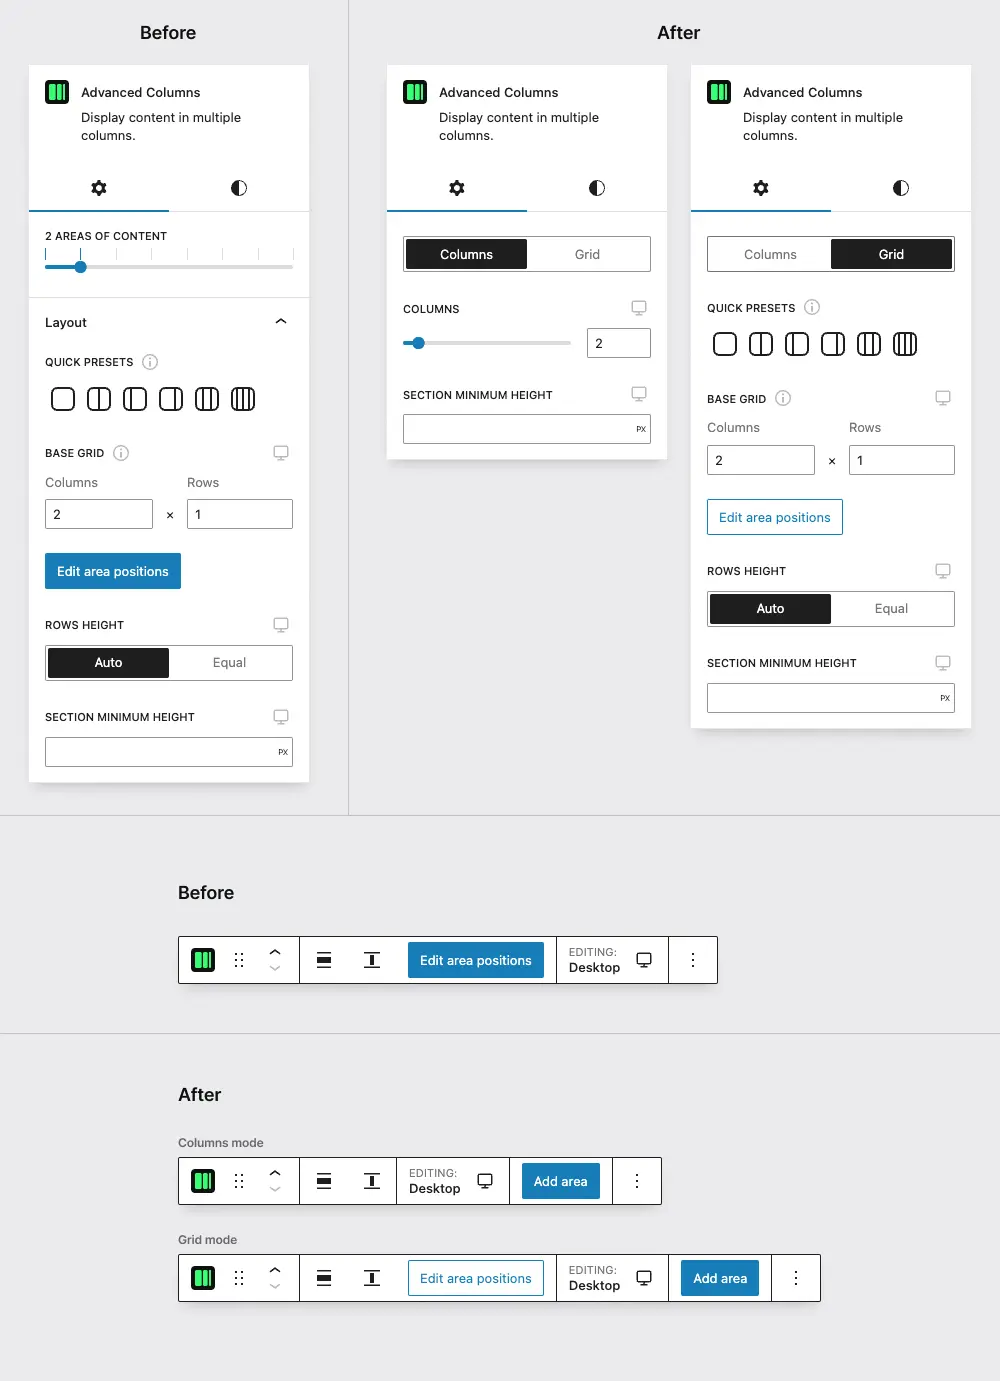 A before and after comparison of the main sidebar panel controls for the layout functionality and the main block toolbar.